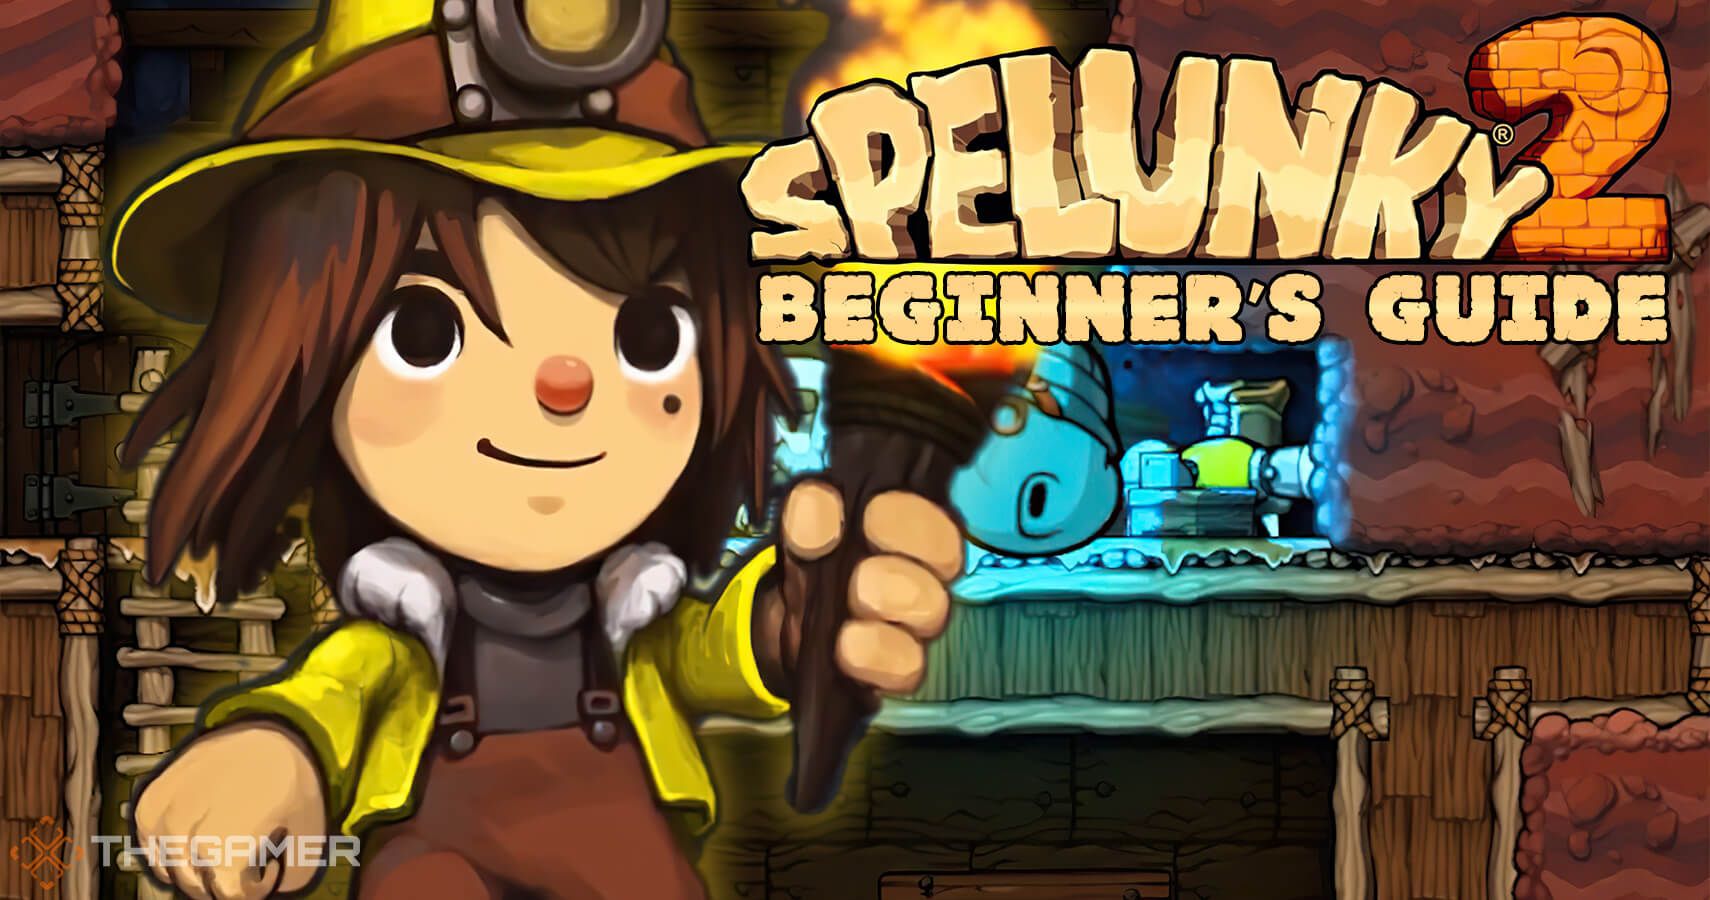 Delayed roguelike 'Spelunky 2' comes to PS4 on September 15th